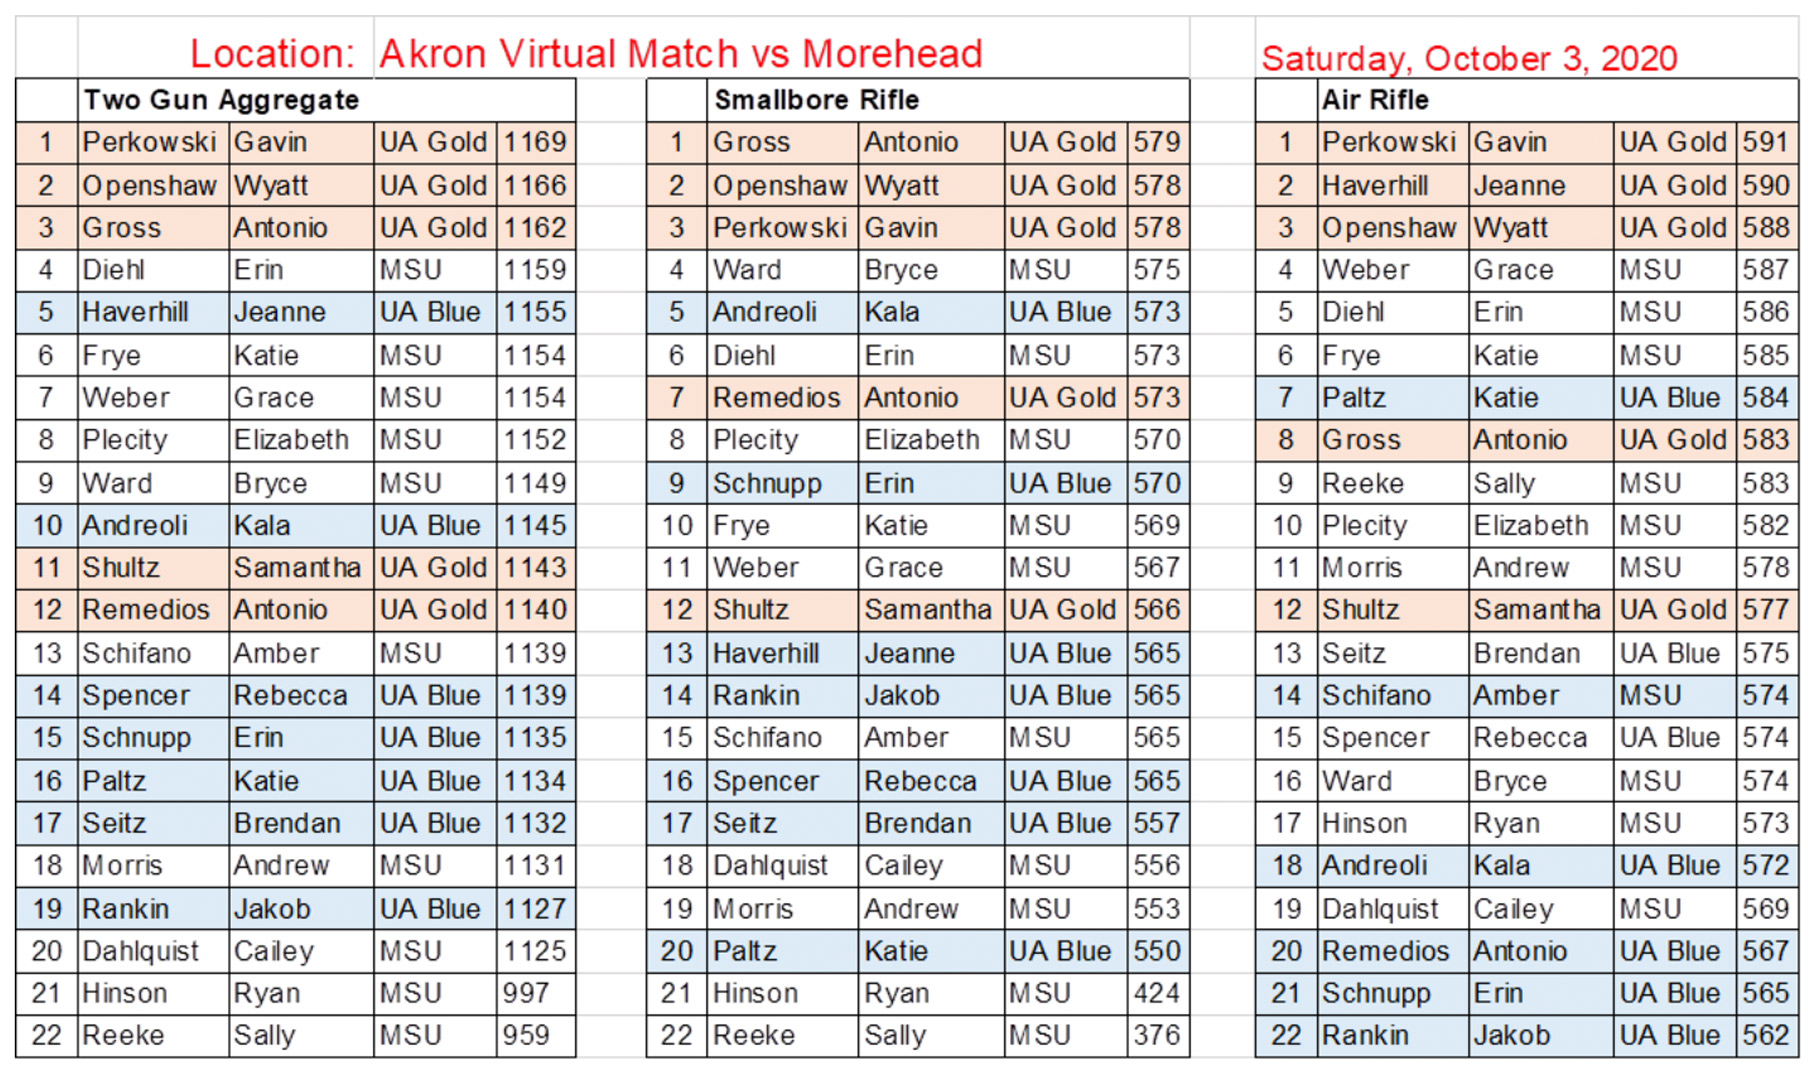 2020 Akron vs. Morehead State Virtual Match Results